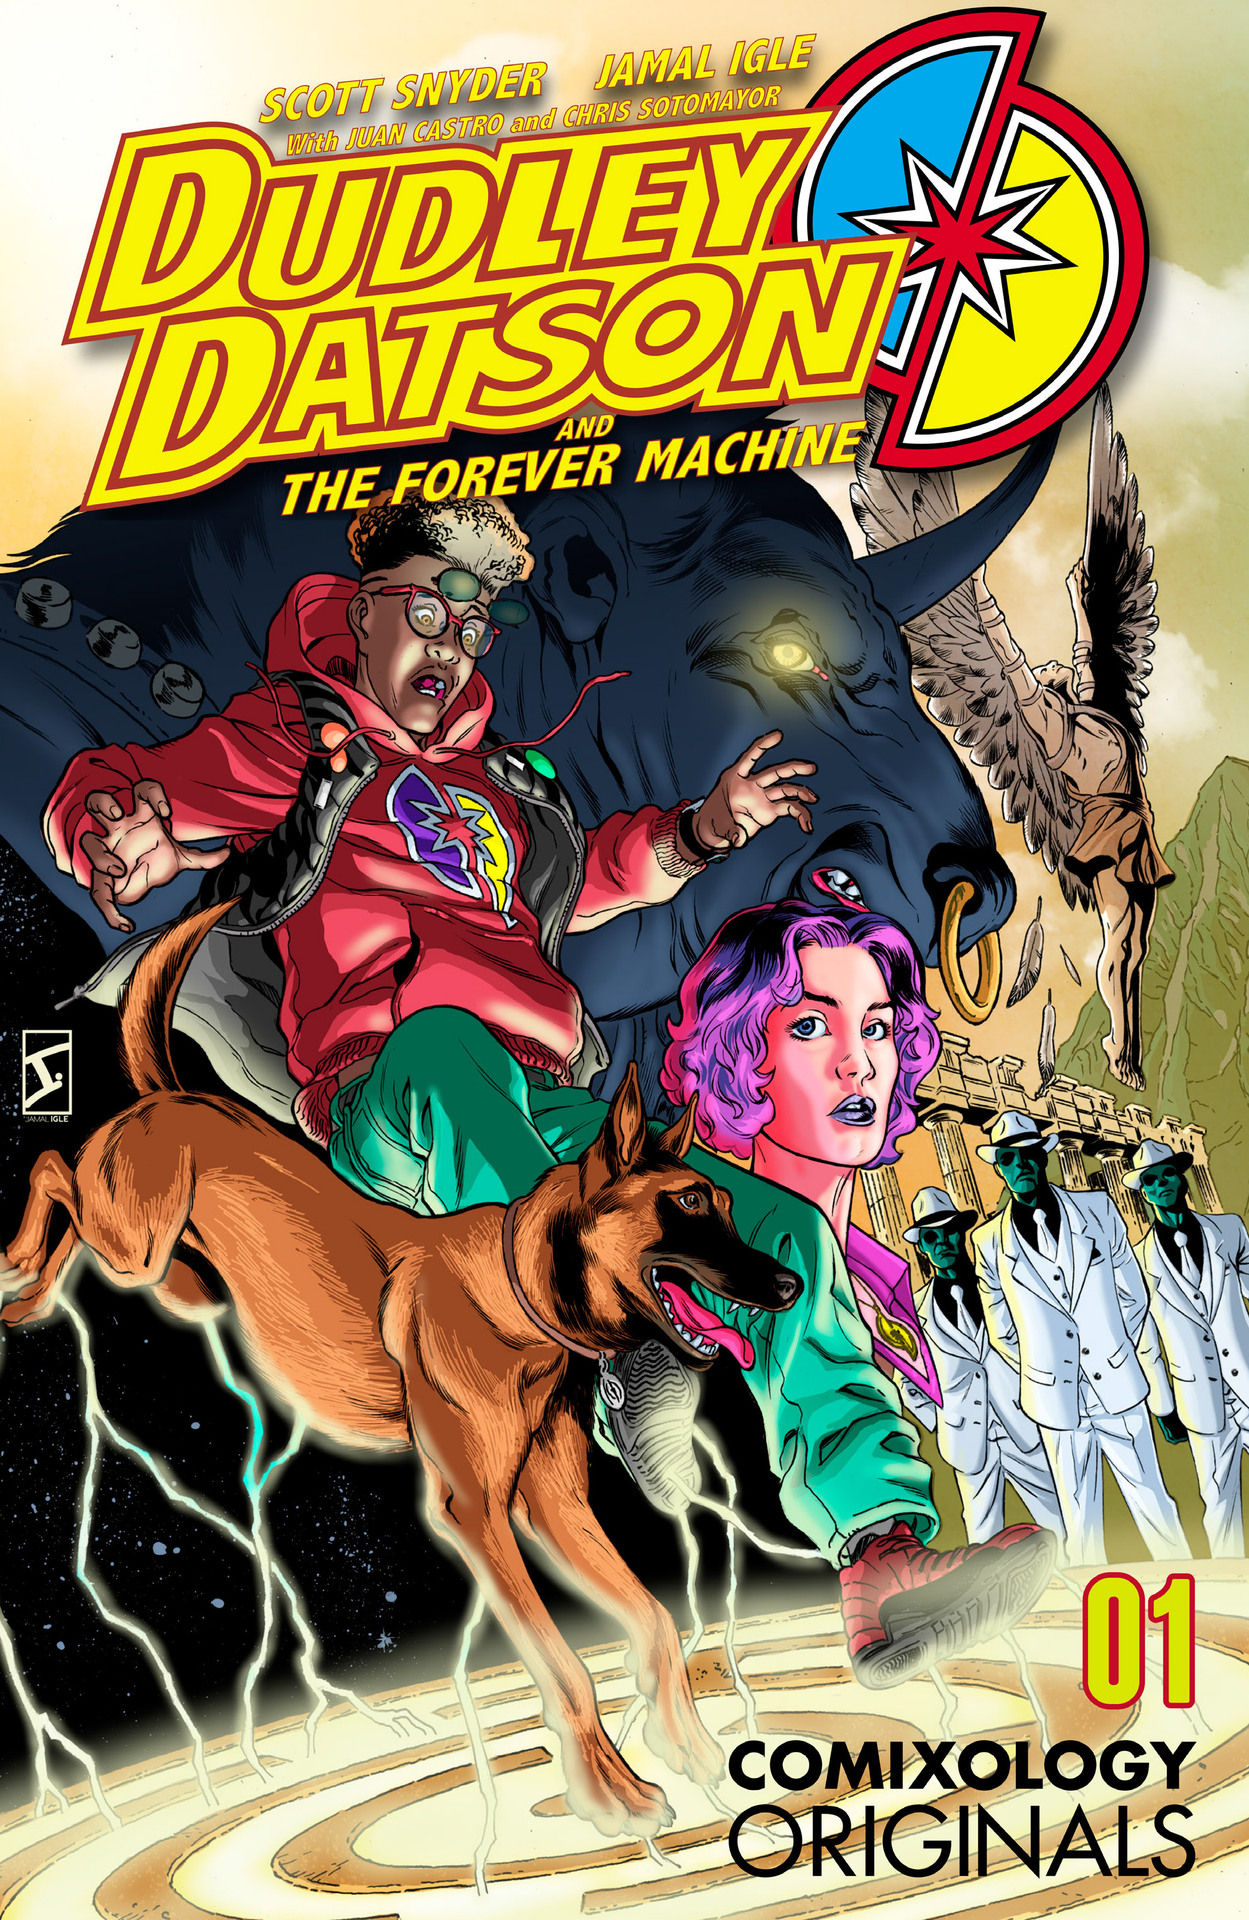 Read online Dudley Datson and the Forever Machine comic -  Issue #1 - 1